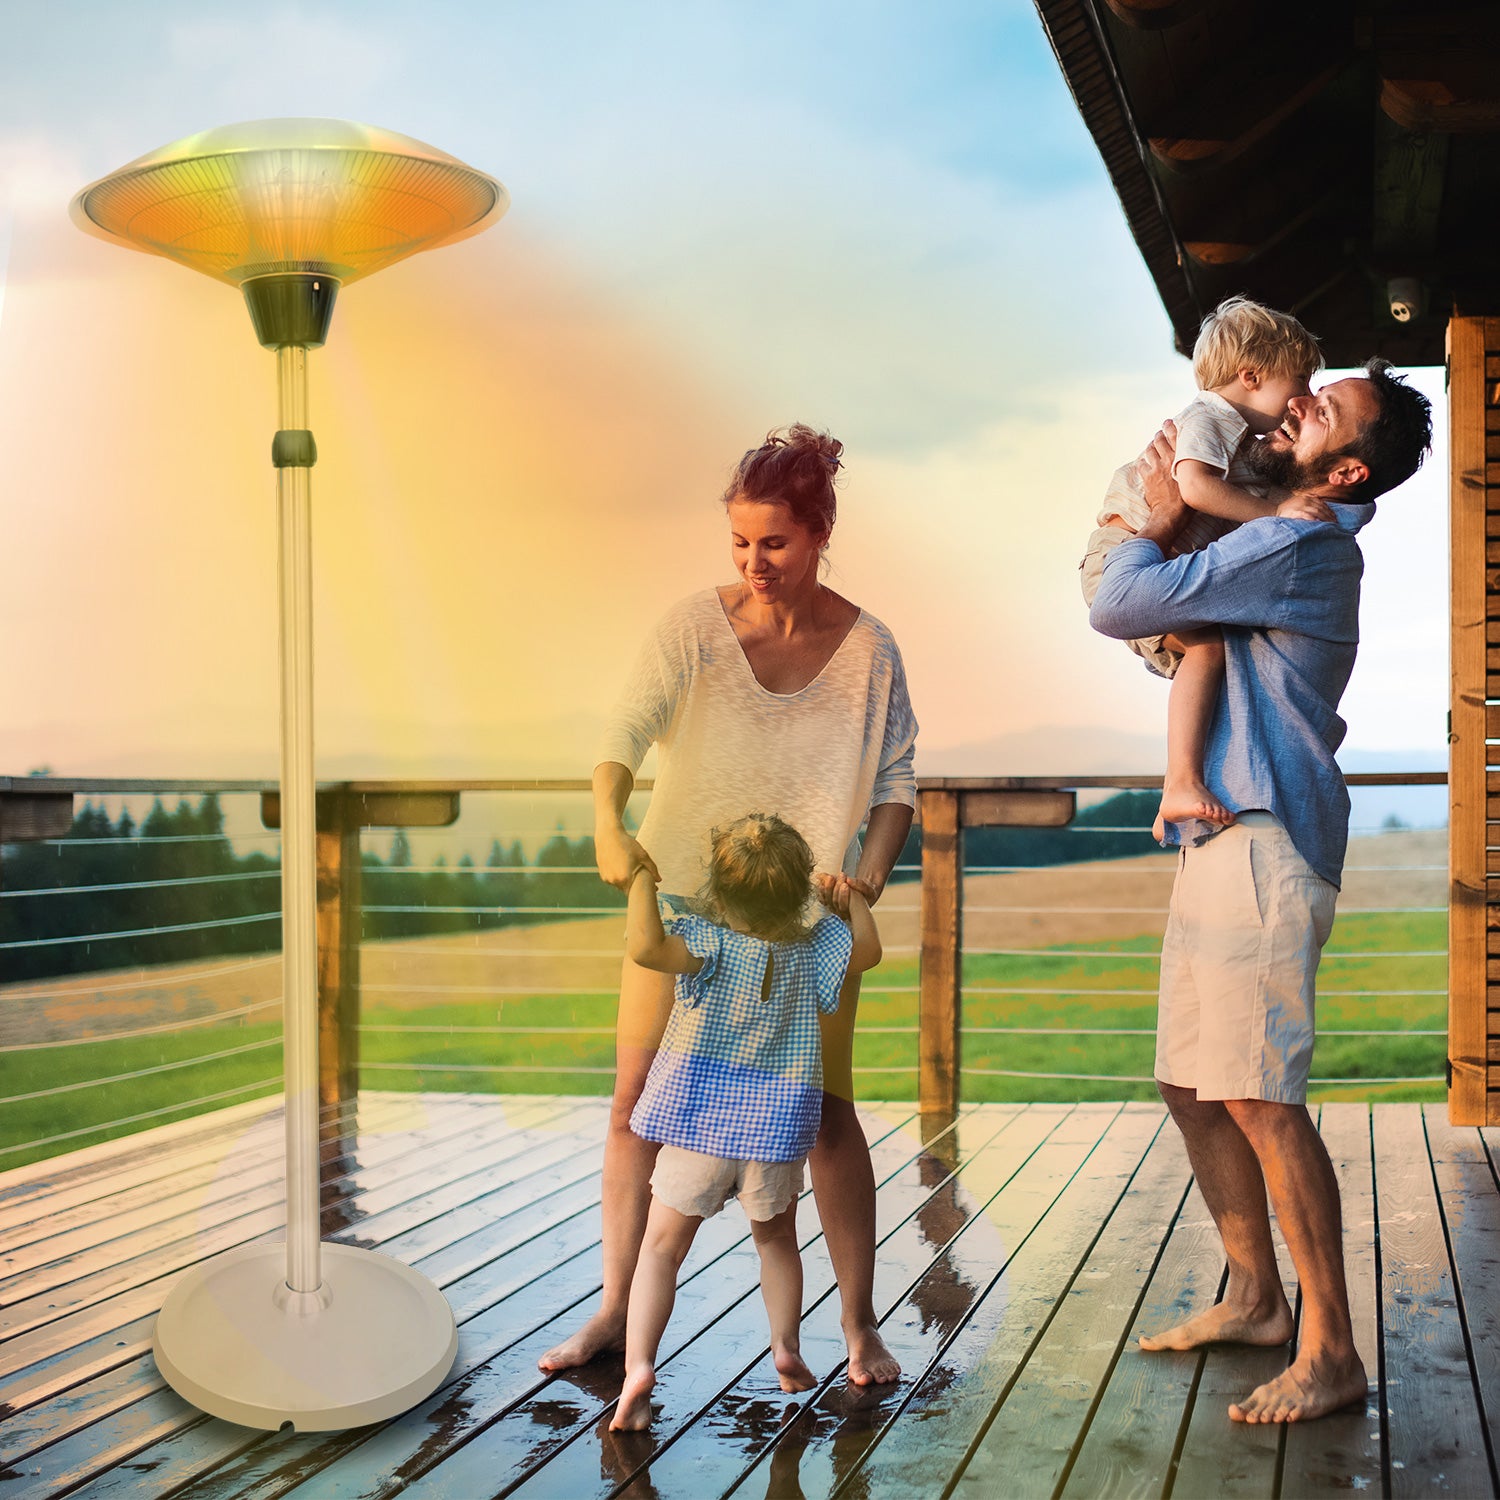 Family playing outdoor beside an outdoor patio heater